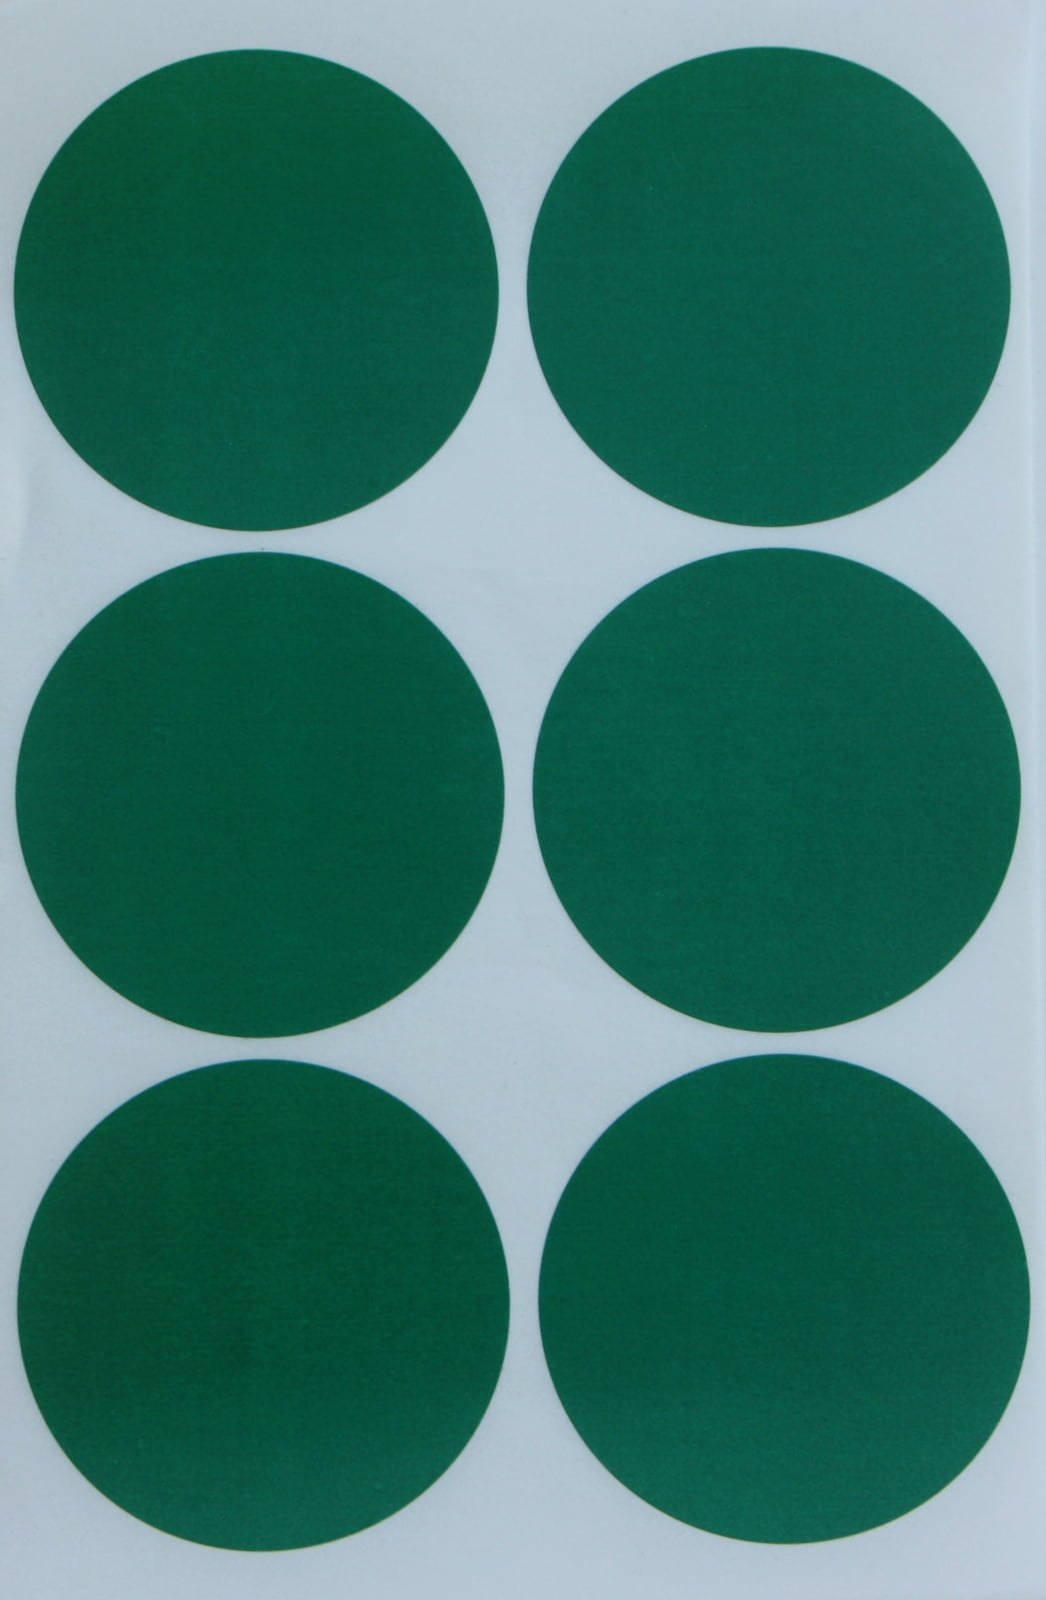 Royal Green Black Sticker Dot Removable Labels 15mm (Approx 5/8 inch 19/32)  - Colored Circle Stickers 1.5 cm - 385 Pack